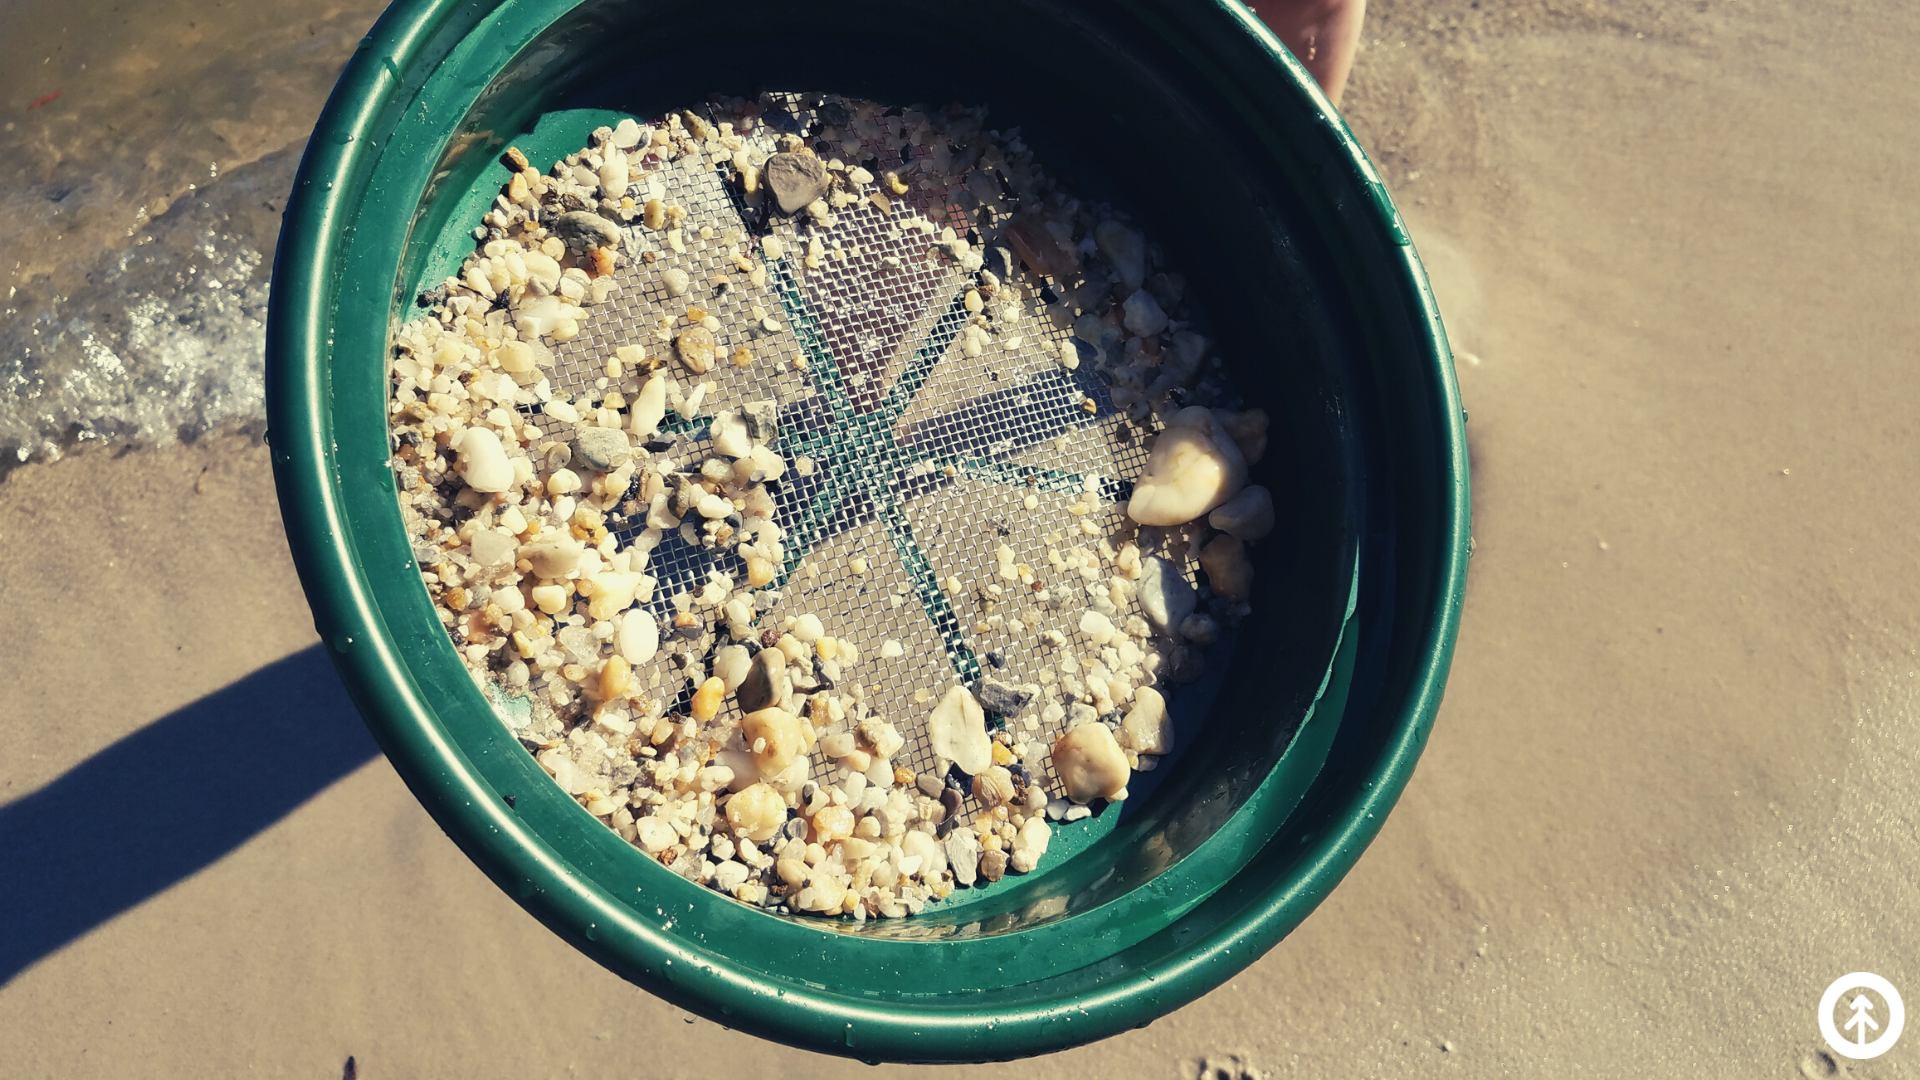 A beachcomber holding a sieve containing sand and a collection of small seashells.